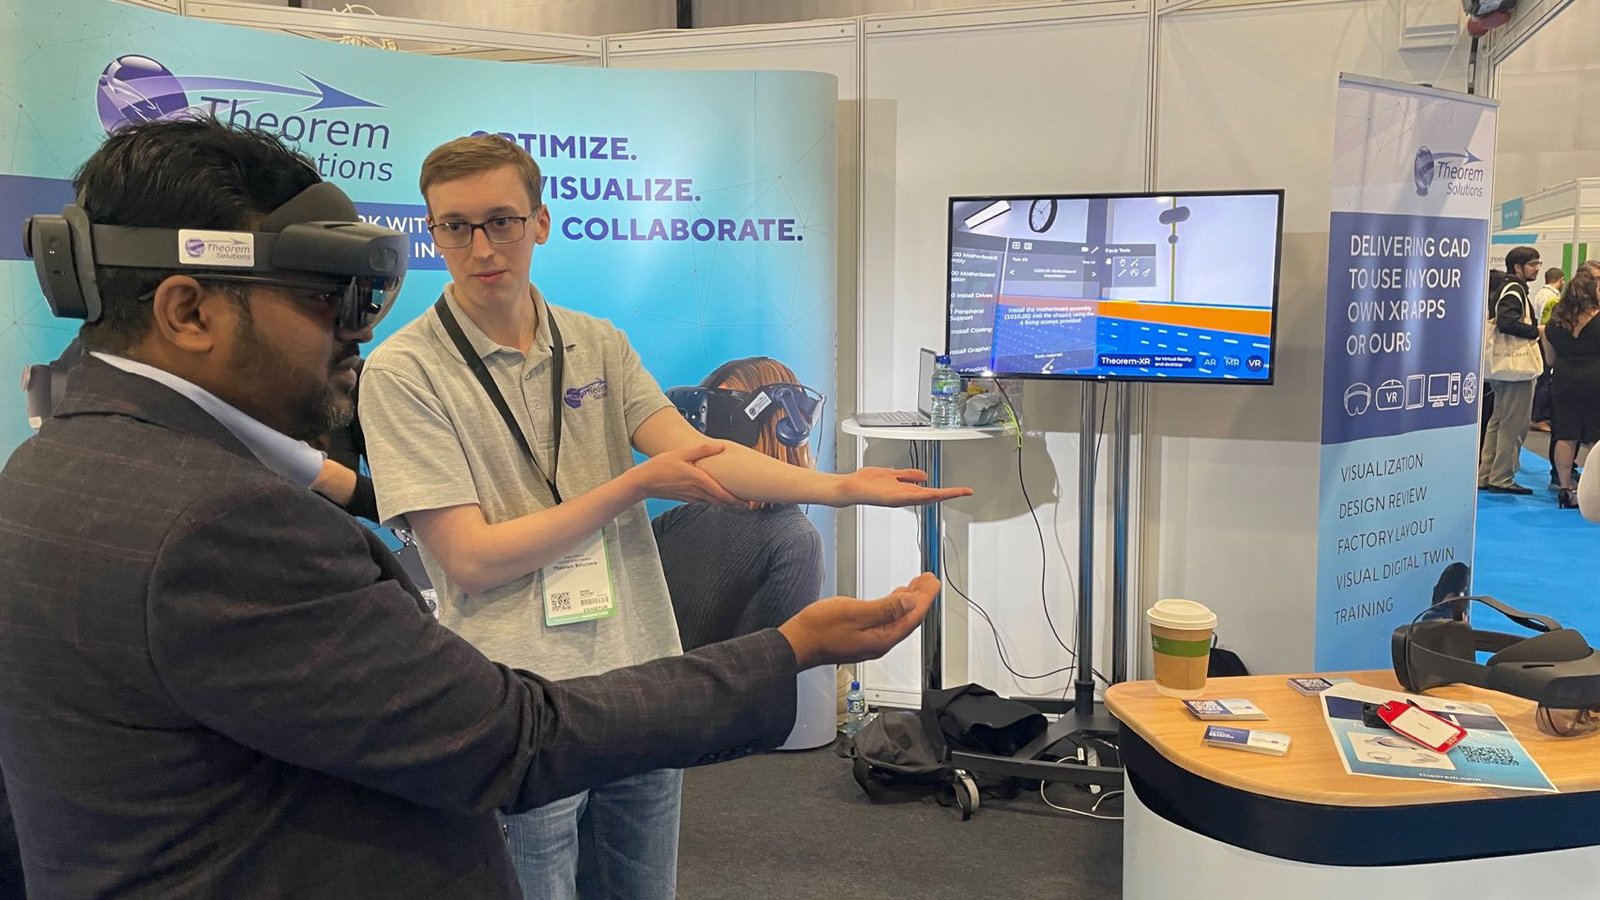 A demonstration of Theorem XR in Mixed Reality at the Smart Factory Expo 2022 in Liverpool, UK.